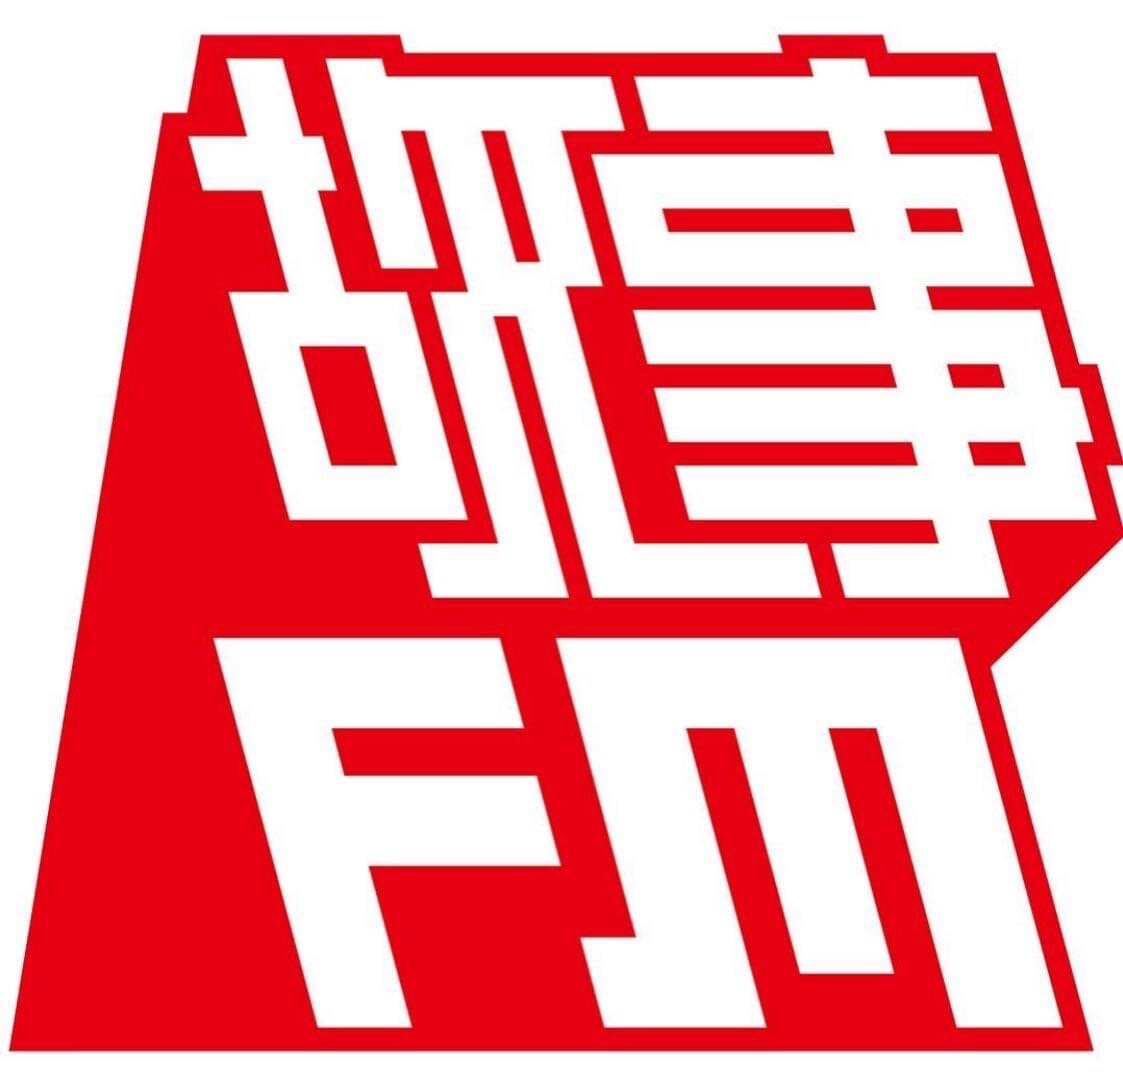 Yang Yi: There are a couple of storytelling shows breaking through in the China podcast space at the moment. The most famous of these is 故事FM.